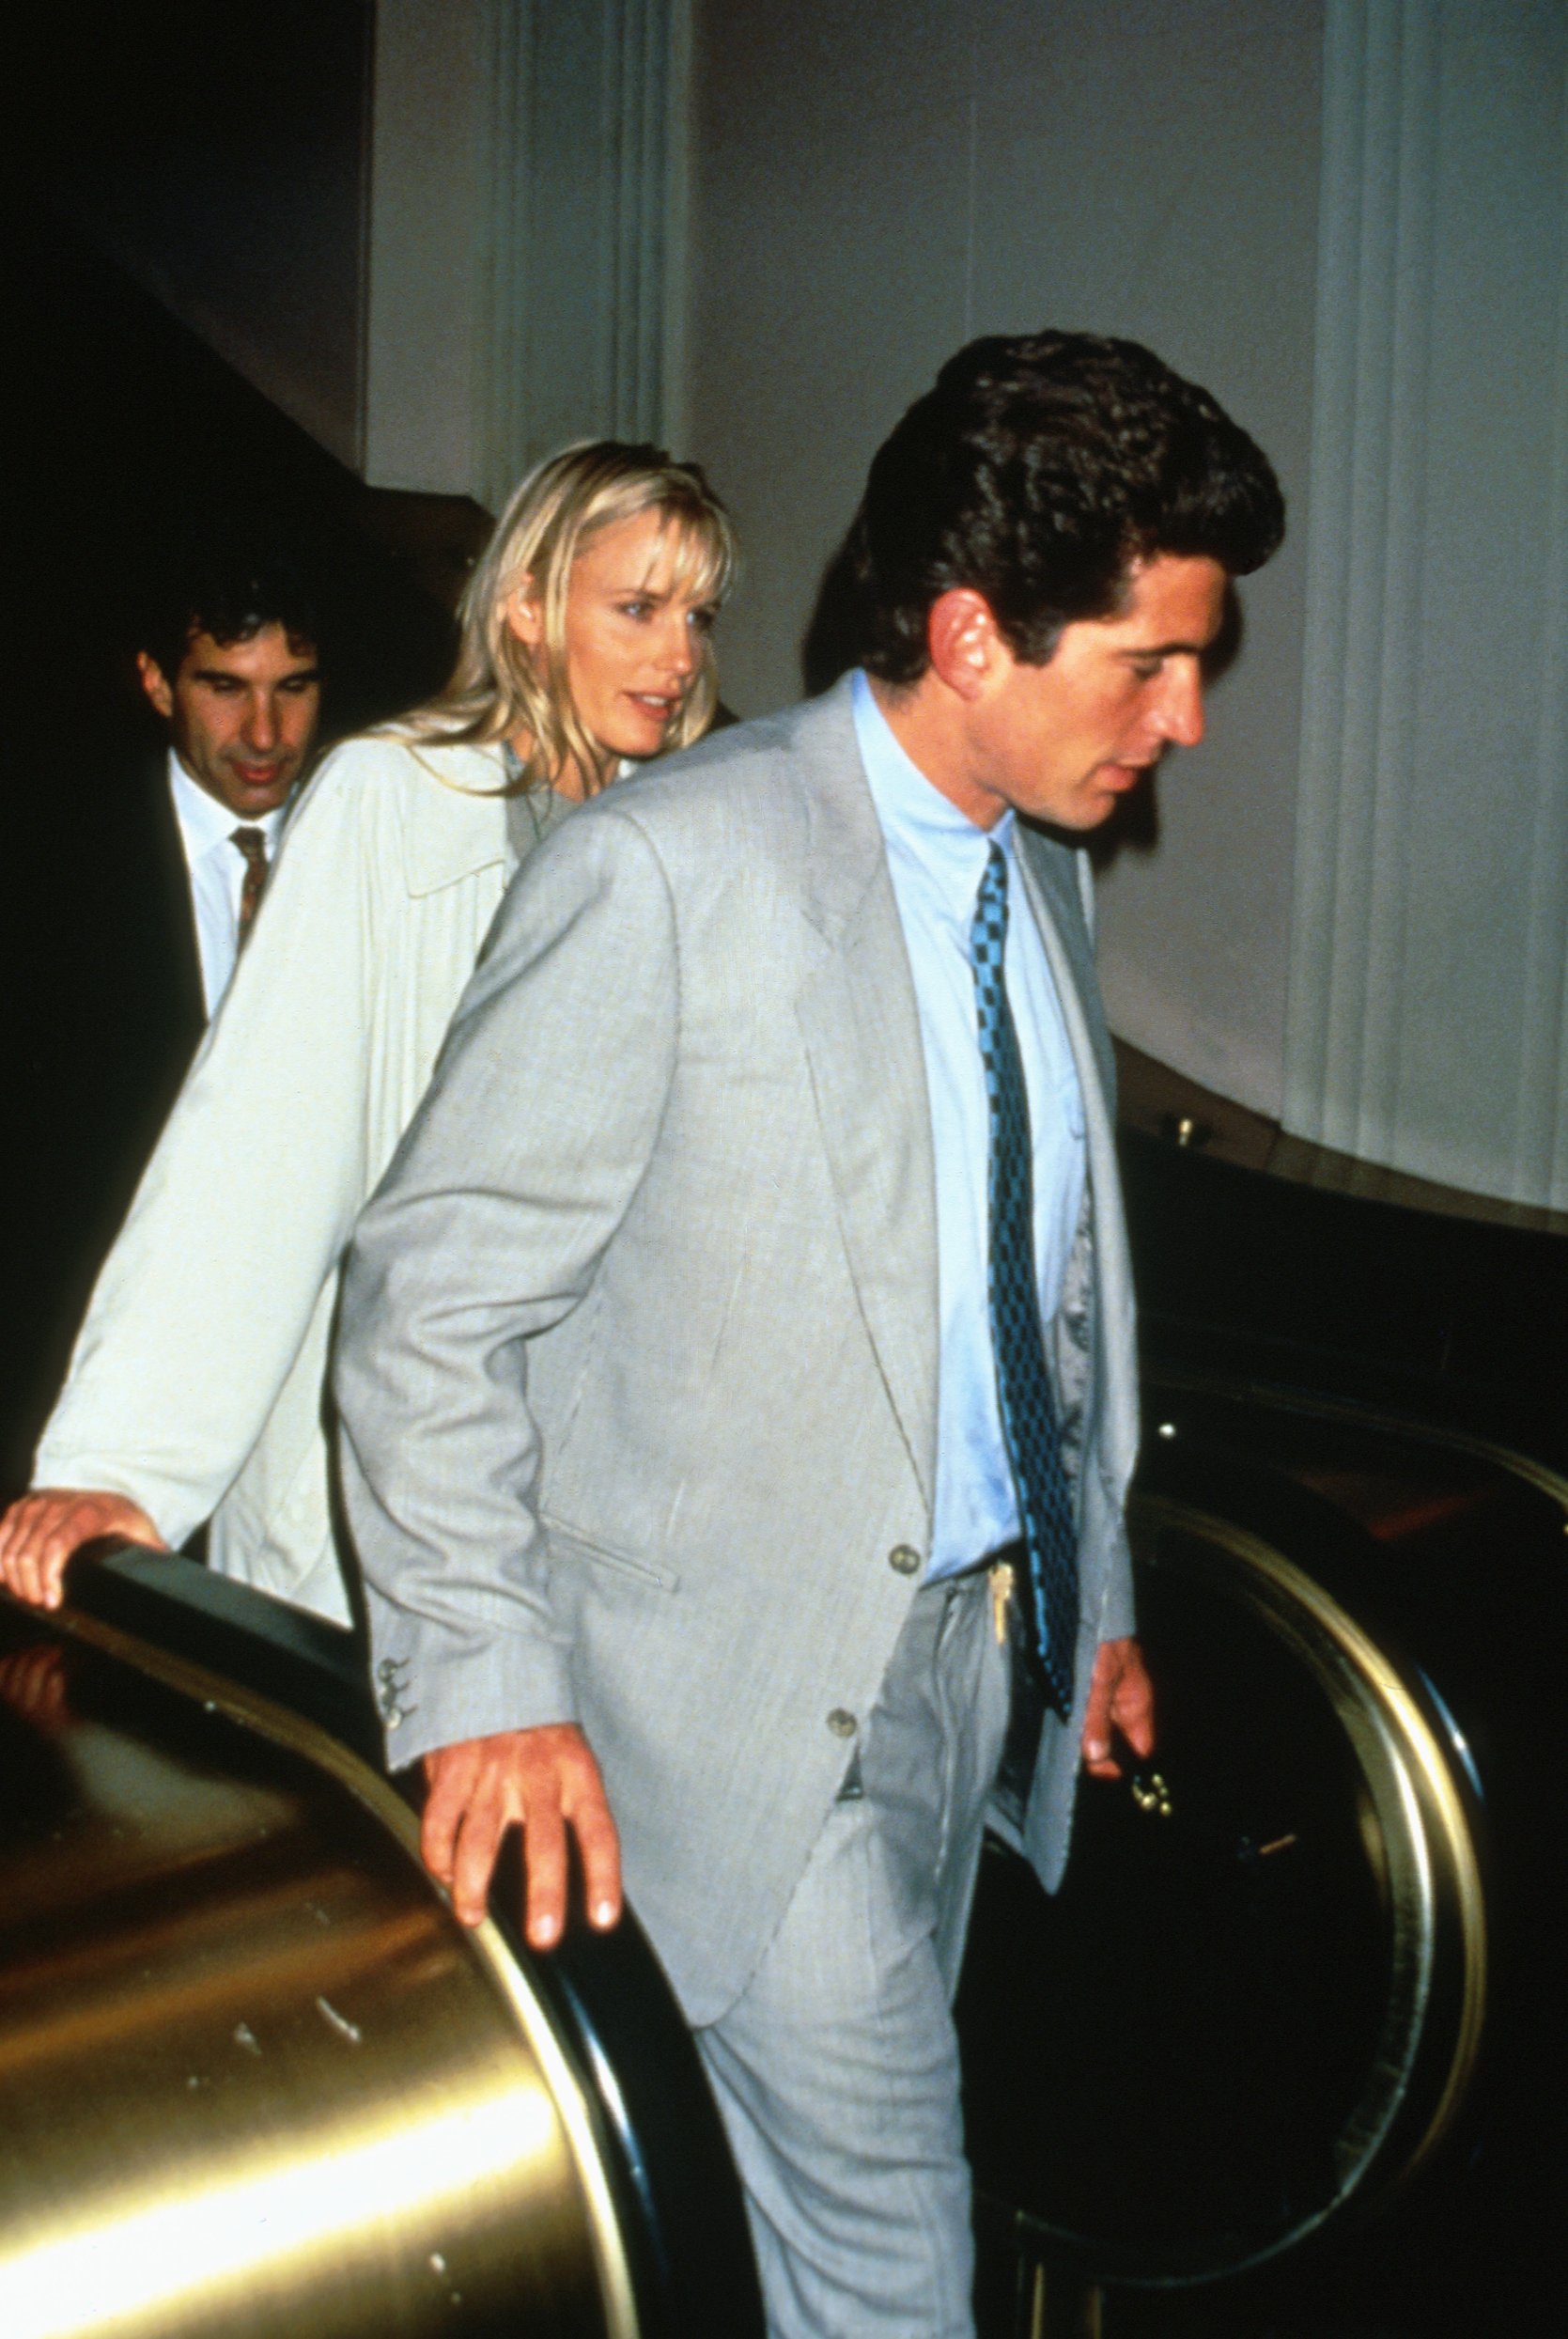 Magazine publisher and journalist John F. Kennedy Jr. photographed walking with girlfriend Daryl Hannah. / Source: Getty Images